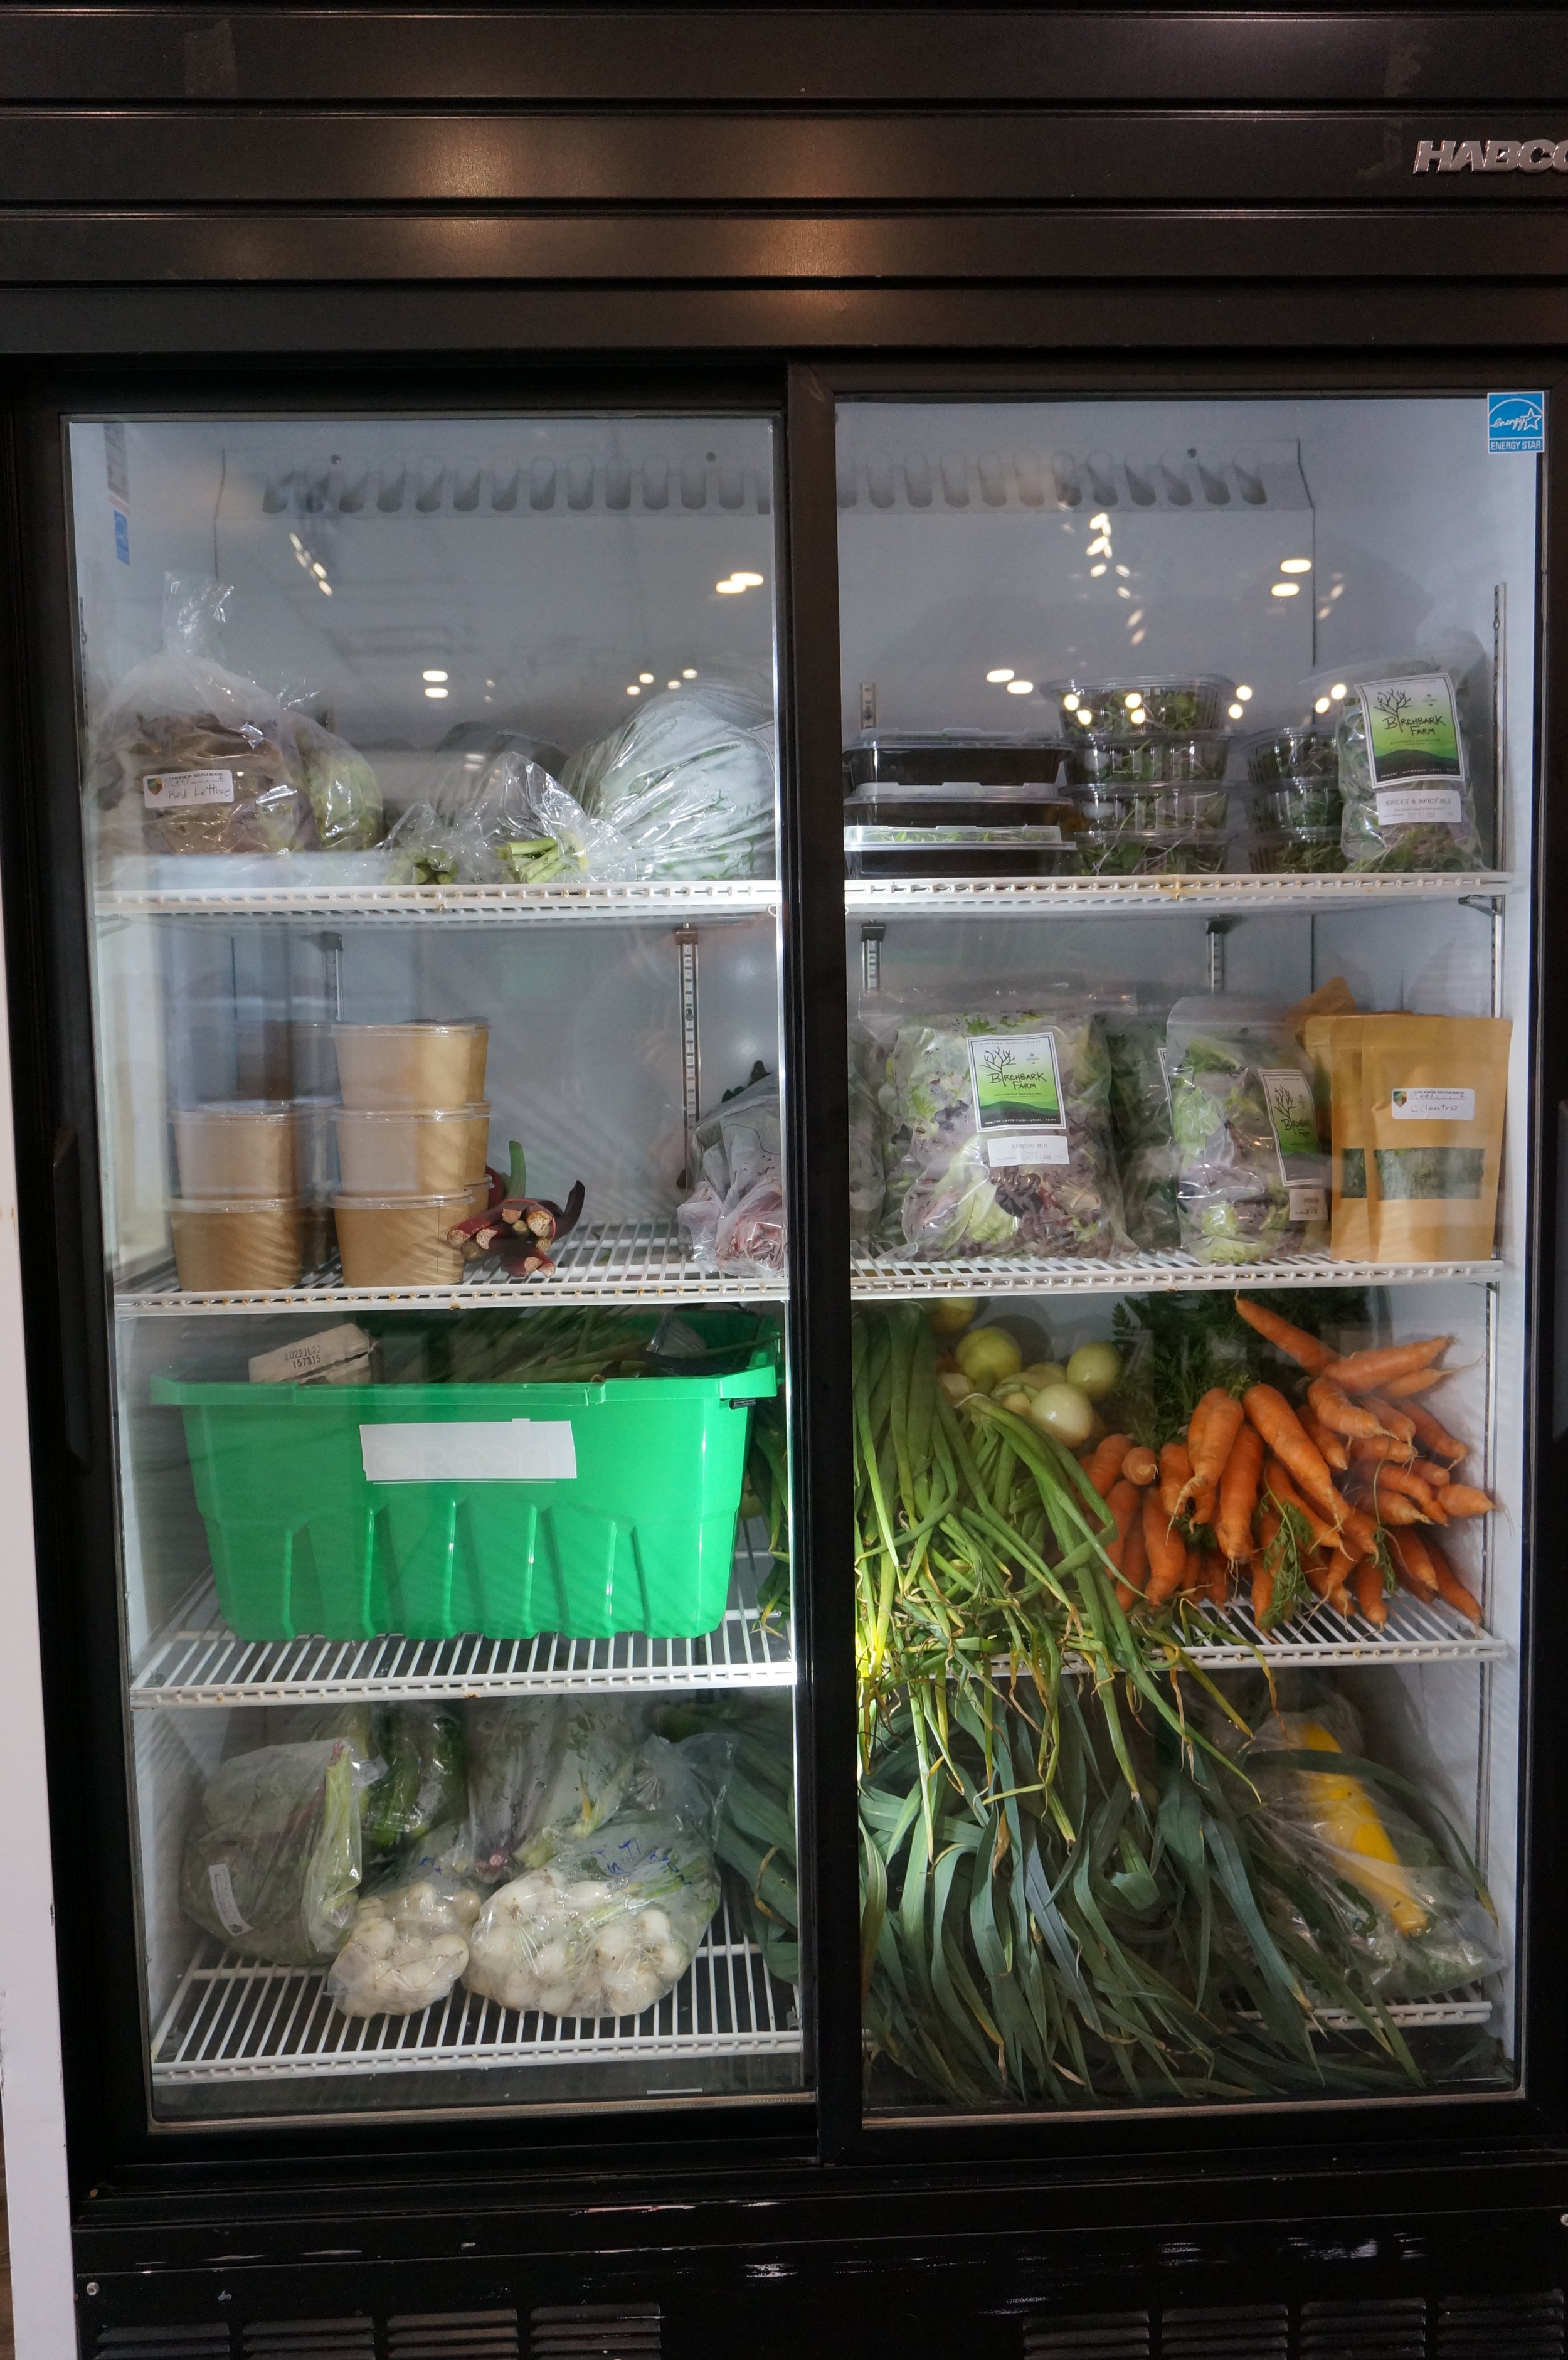  A commercial cooler fridge stocked with local greens, carrots, onions, spring onions, zucchini, eggs, and small containers of food. 